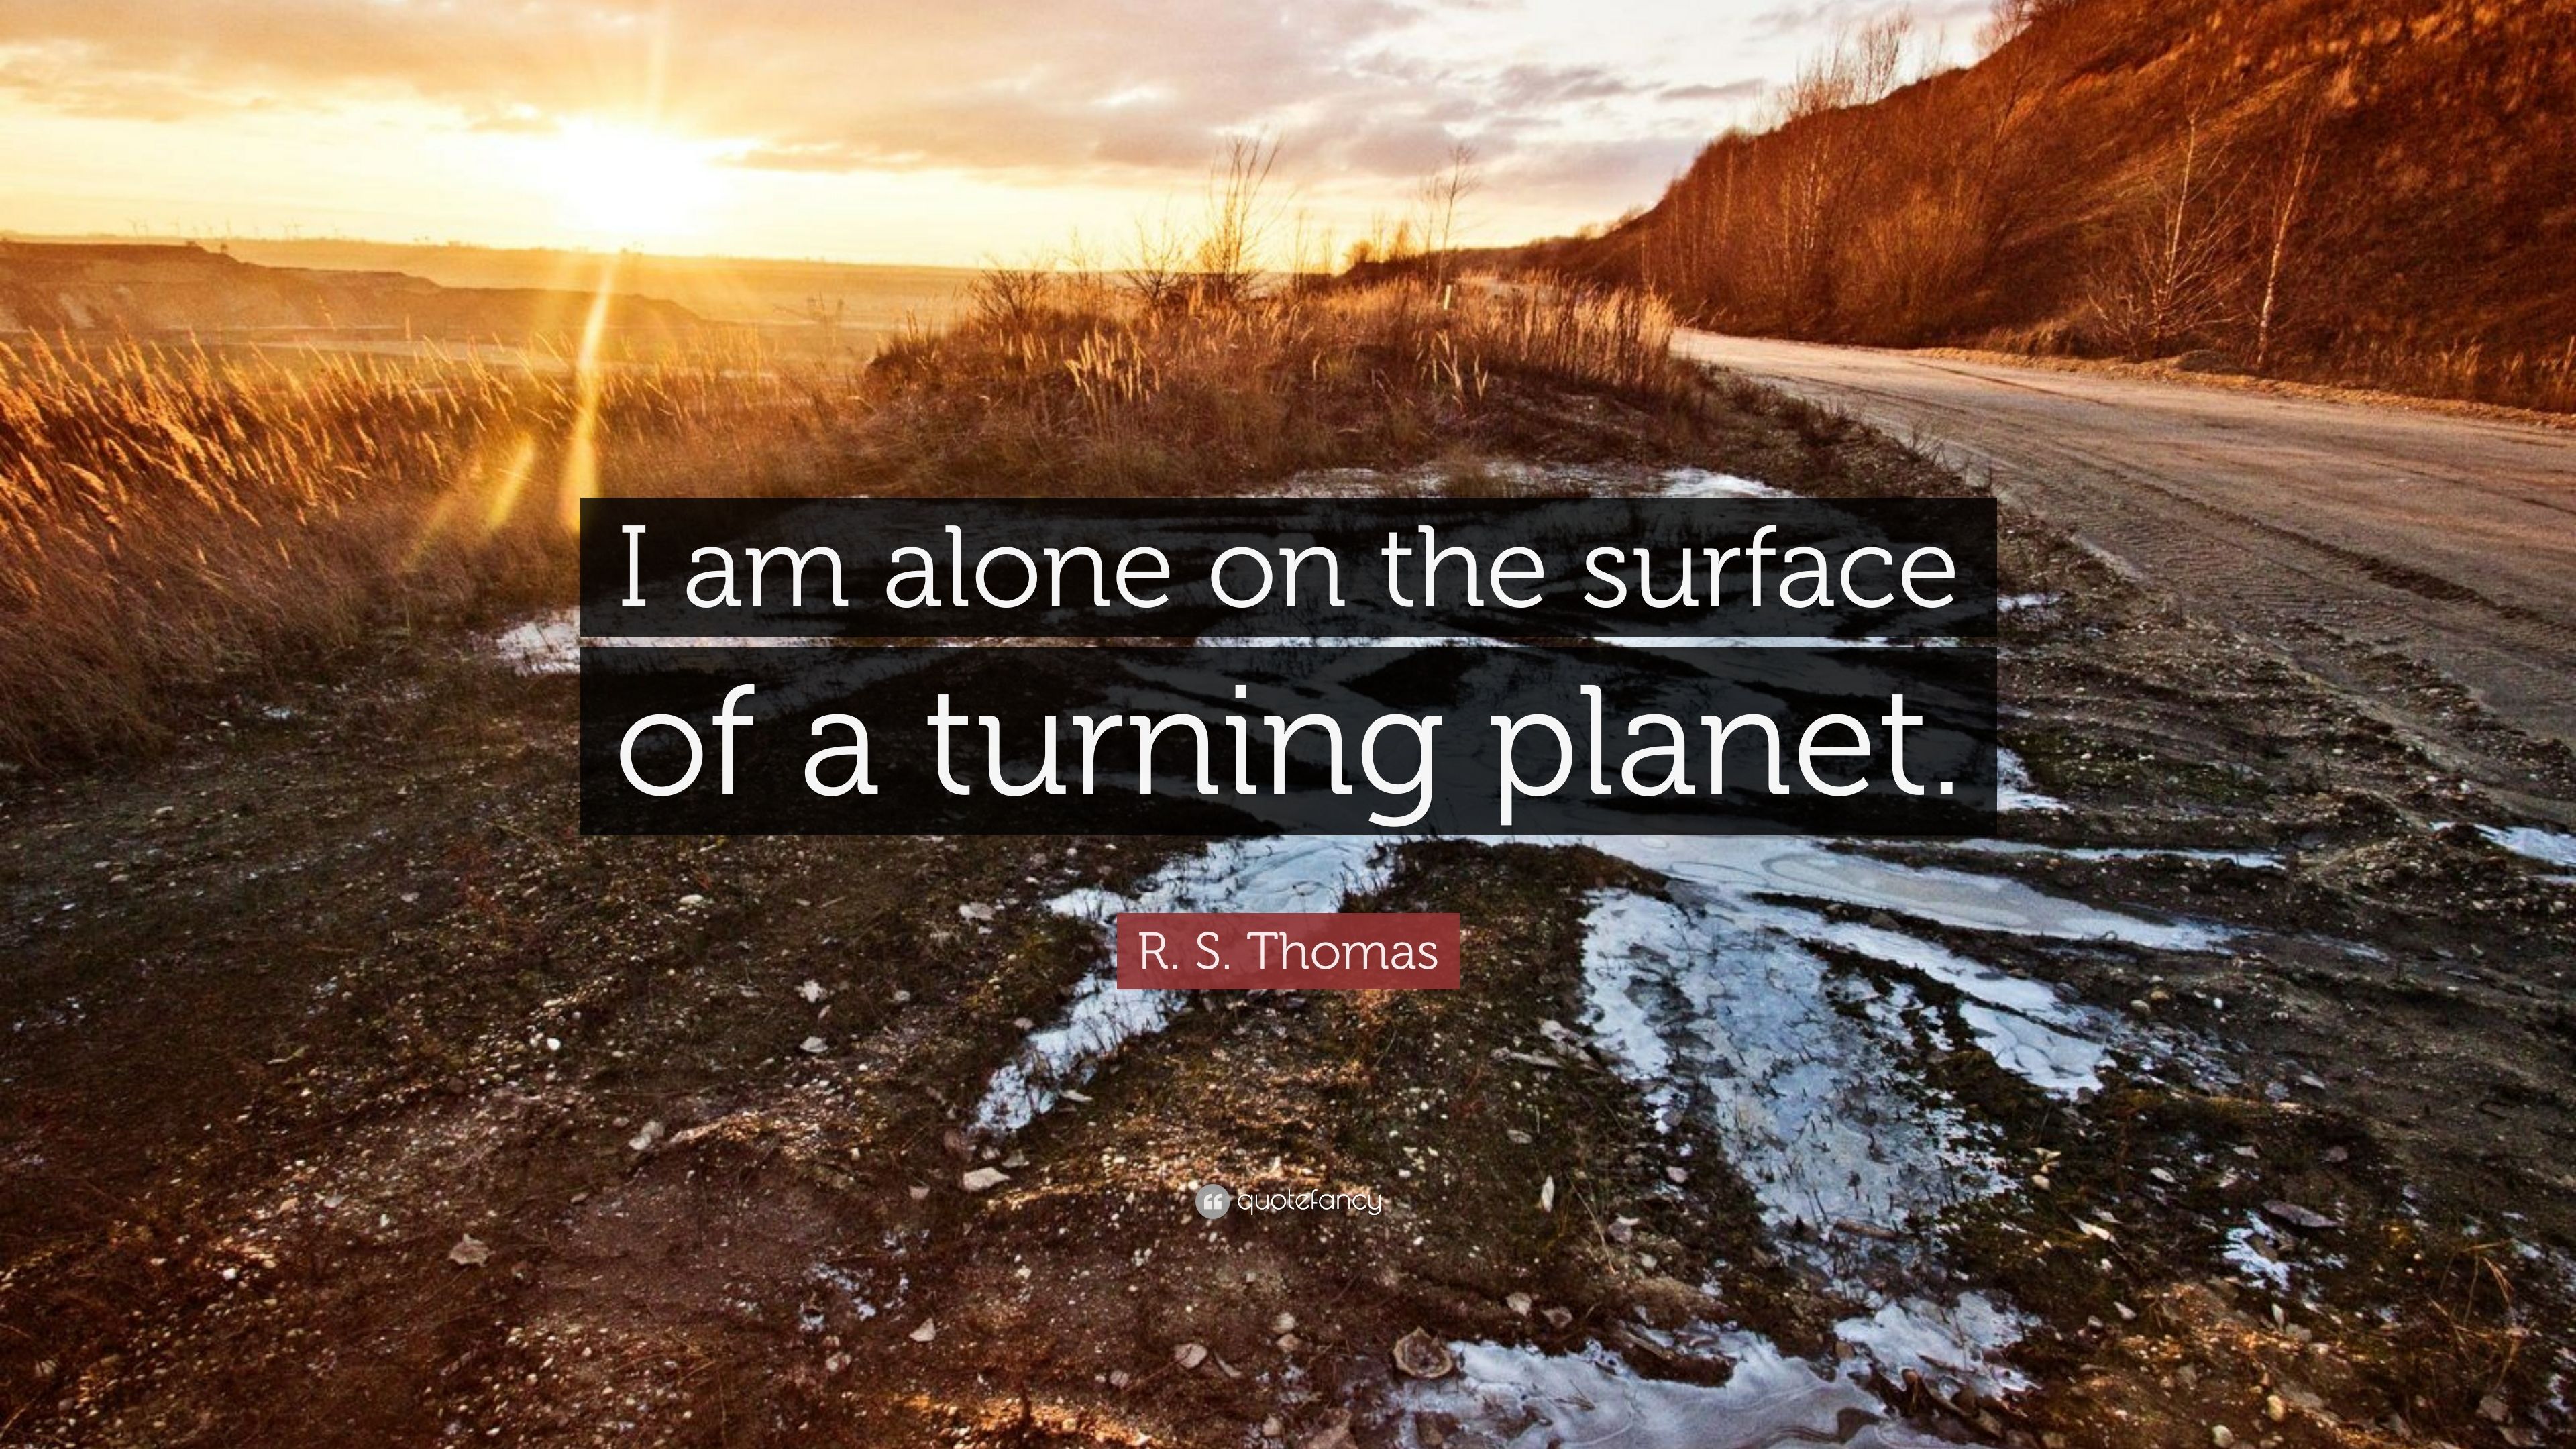 R. S. Thomas Quote: “I am alone on the surface of a turning planet